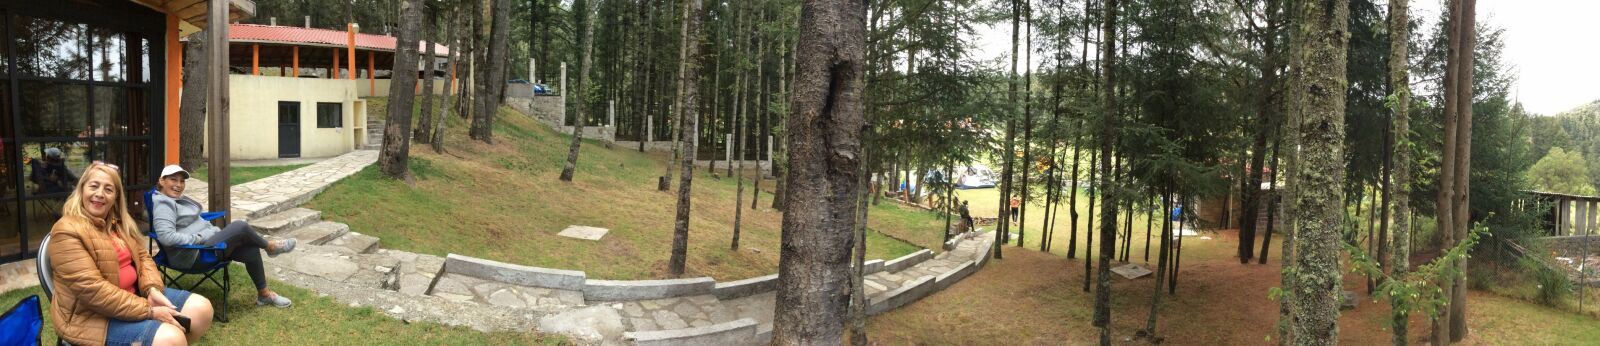 iPad Air back camera 3.3mm f/2.4 sample photo. Pano, forest, tree photography